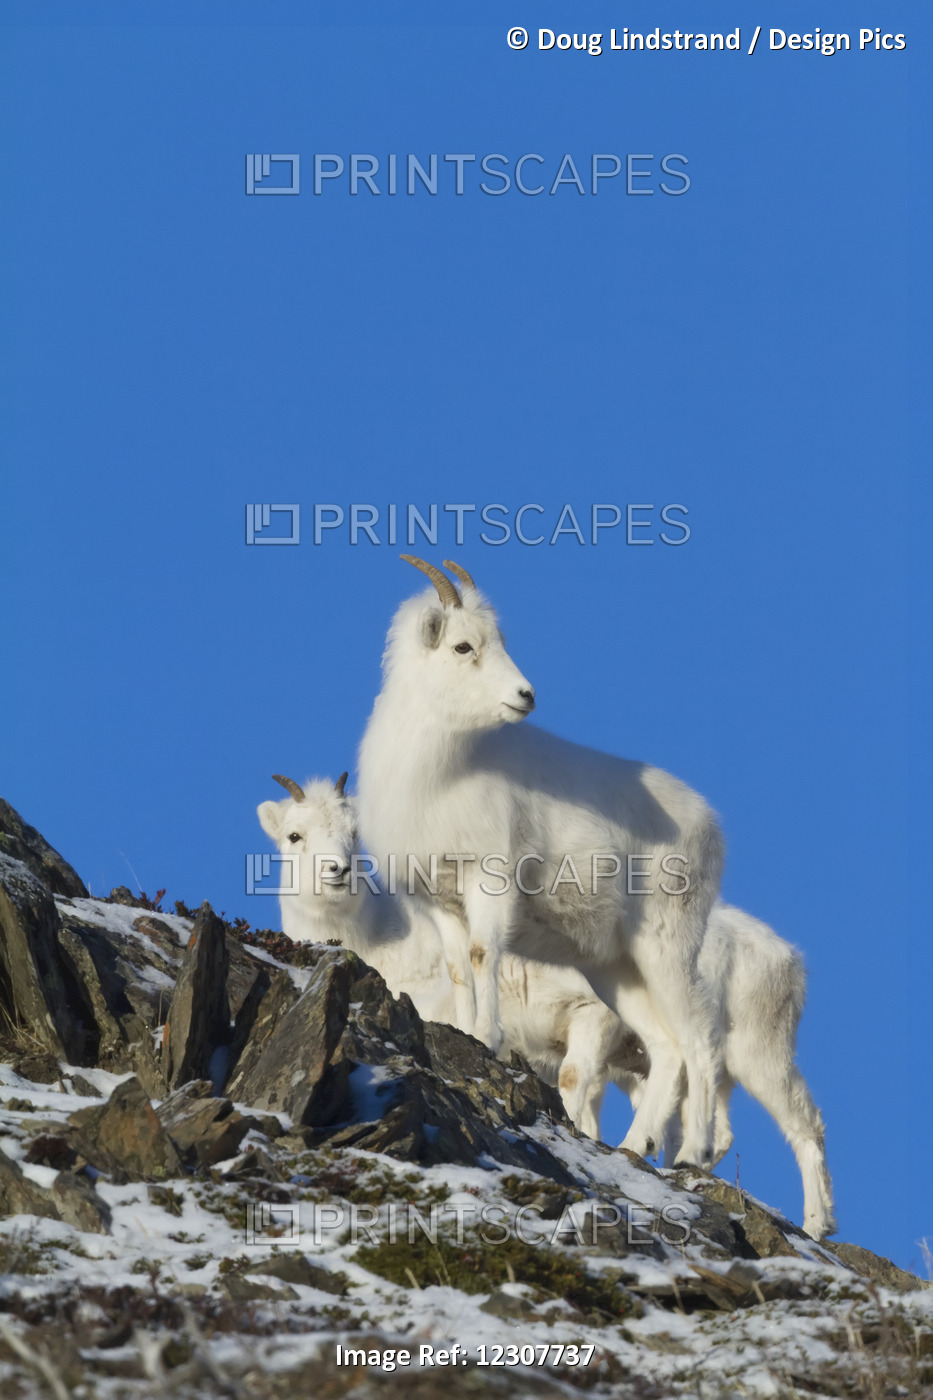 Group Of Dall Sheep Ewes Stand Together And Look At Other Sheep Behind Them. ...